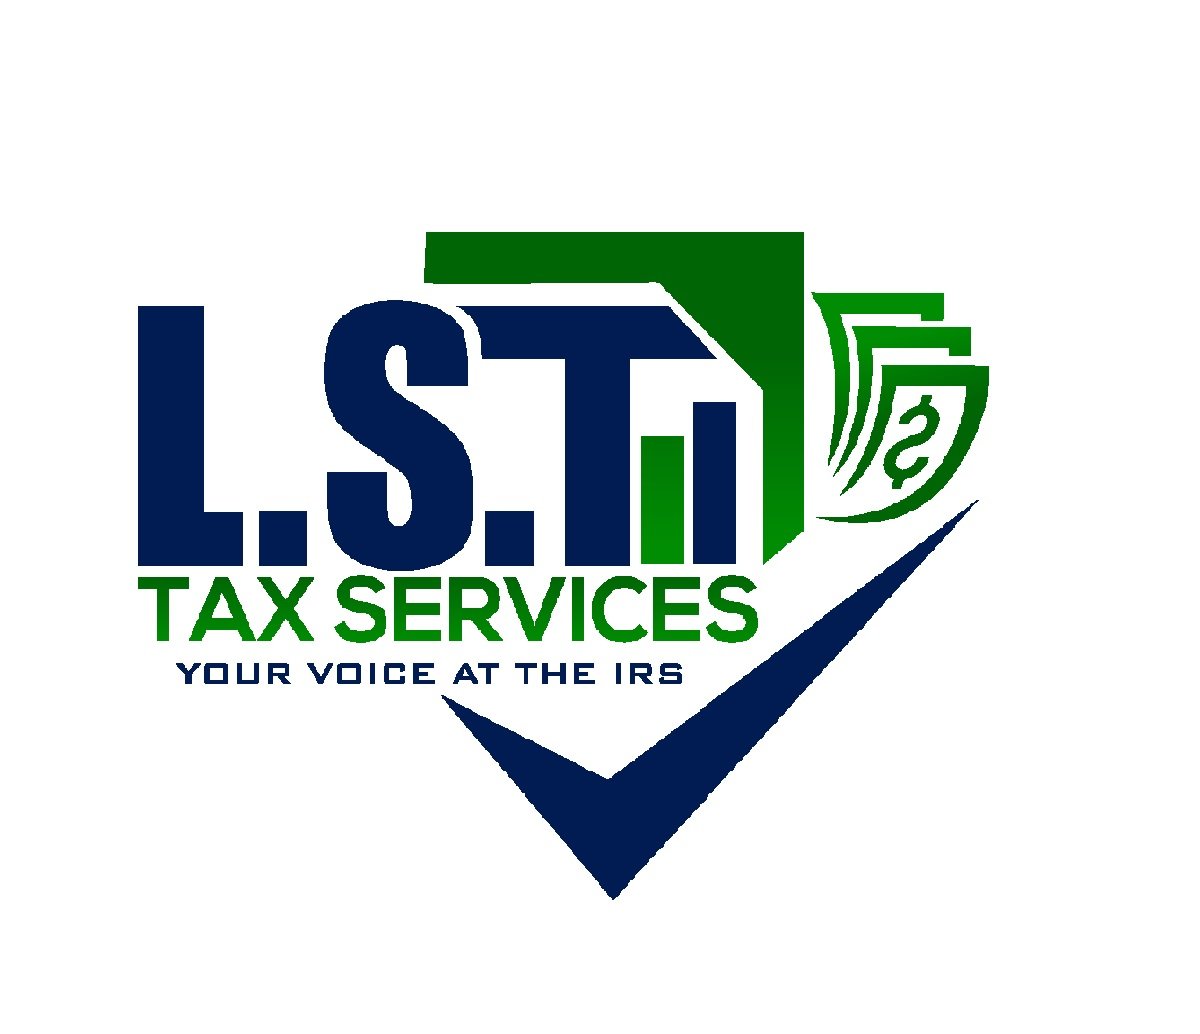 Lst Tax Services cover